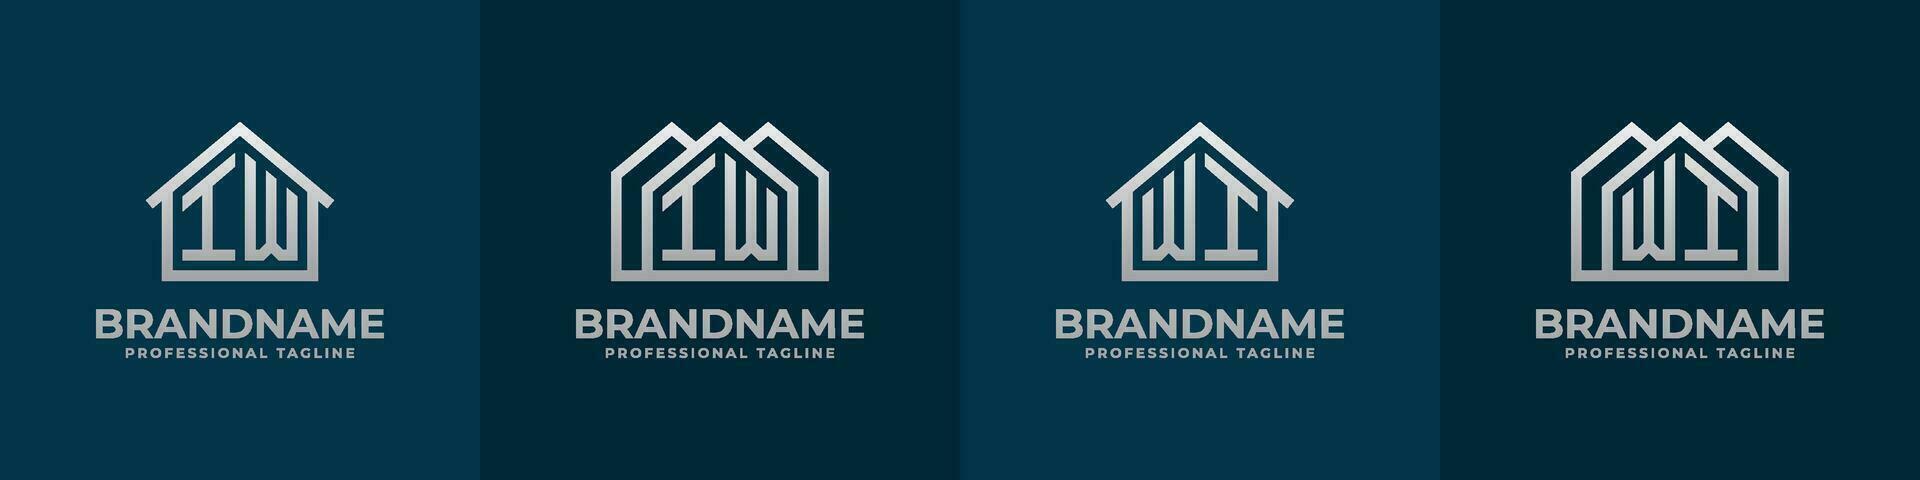 Letter IW and WI Home Logo Set. Suitable for any business related to house, real estate, construction, interior with IW or WI initials. vector